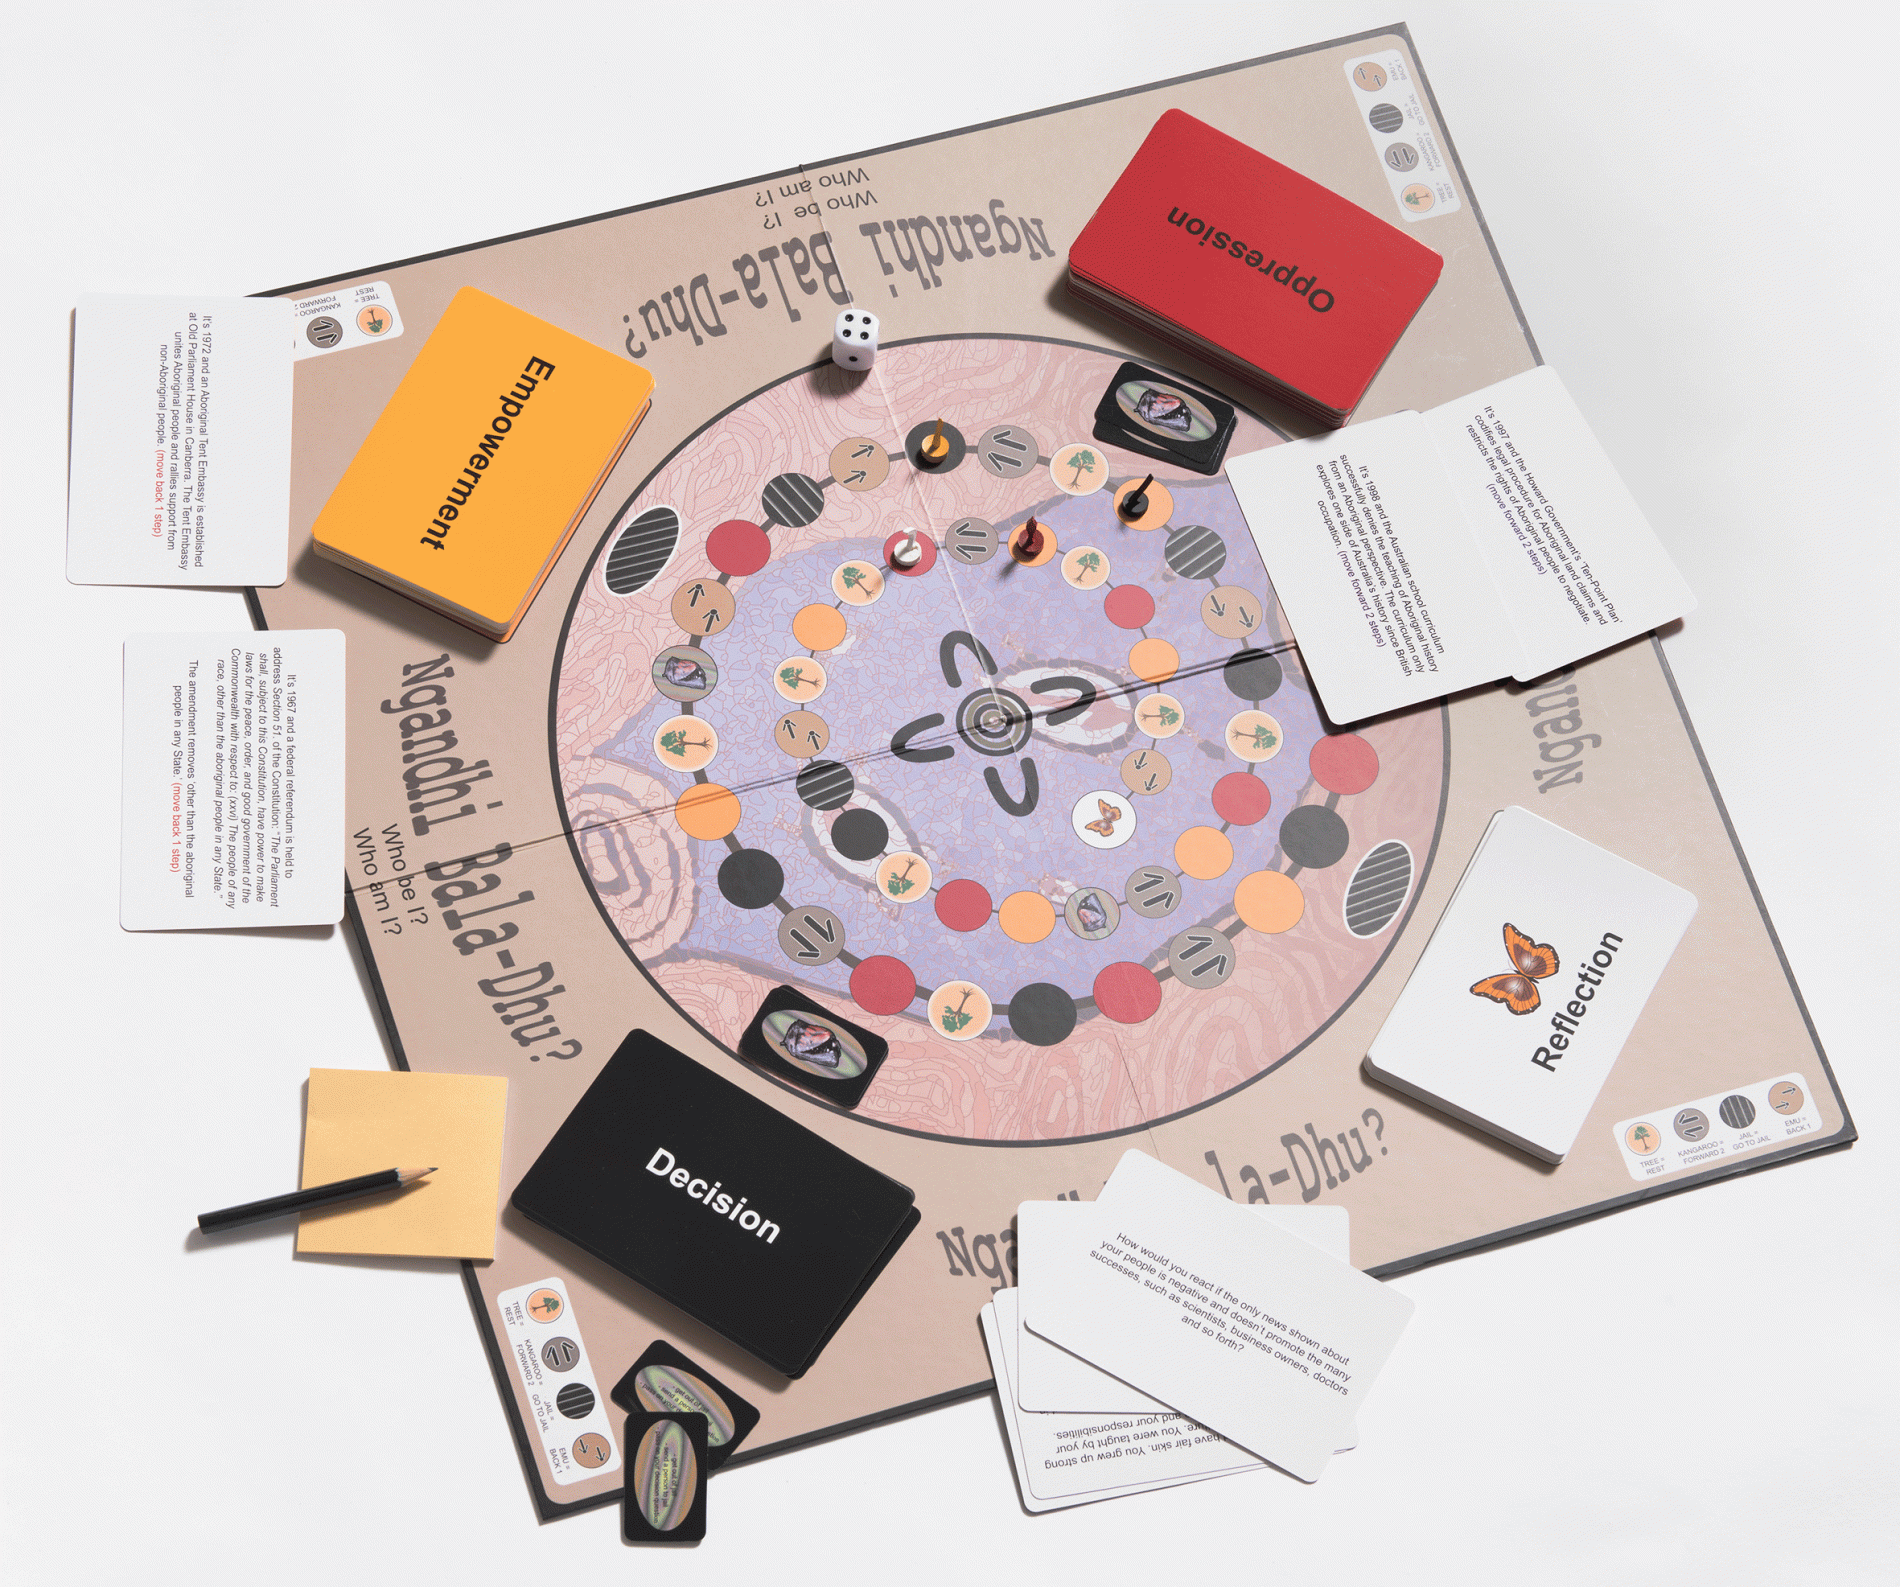 An open board game with the words Ngandhi Bala-Dhu? along one side. A circle in the centre includes a row of smaller circles with images of trees, arrows, shells and red, yellow and black circles. There are 4 stacks of cards, one in each corner of the board. One says Decision, one says Reflections, one says Oppression, one says Empowerment.  